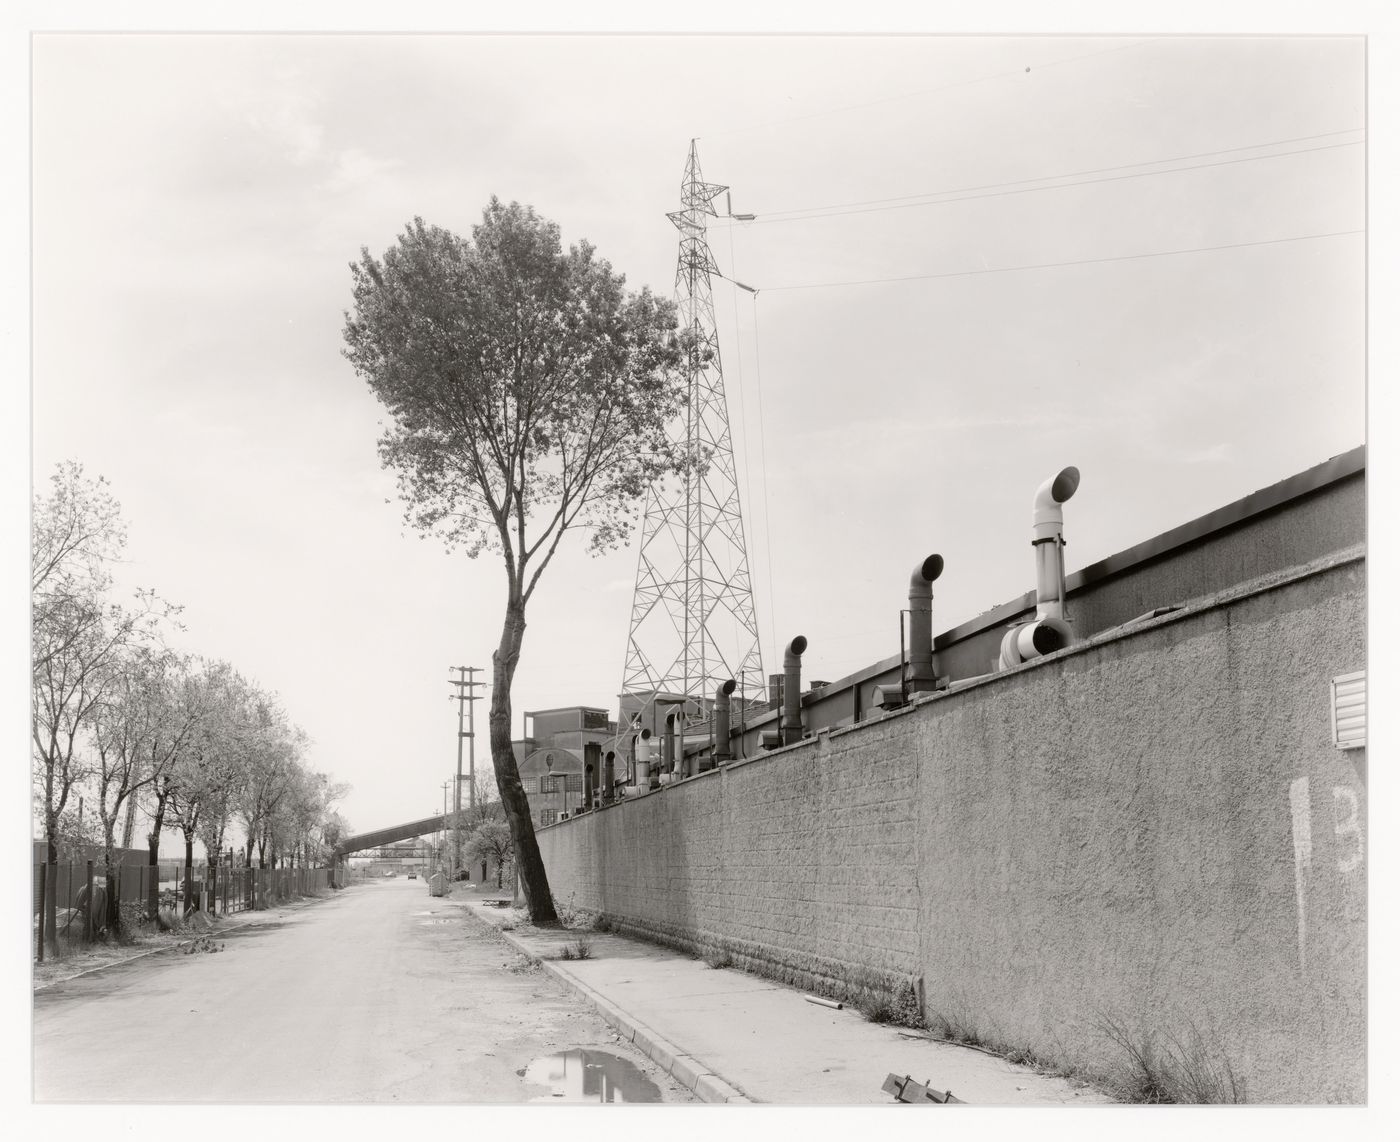 View of a street, wall, trees and utility poles, Marghera, Italy